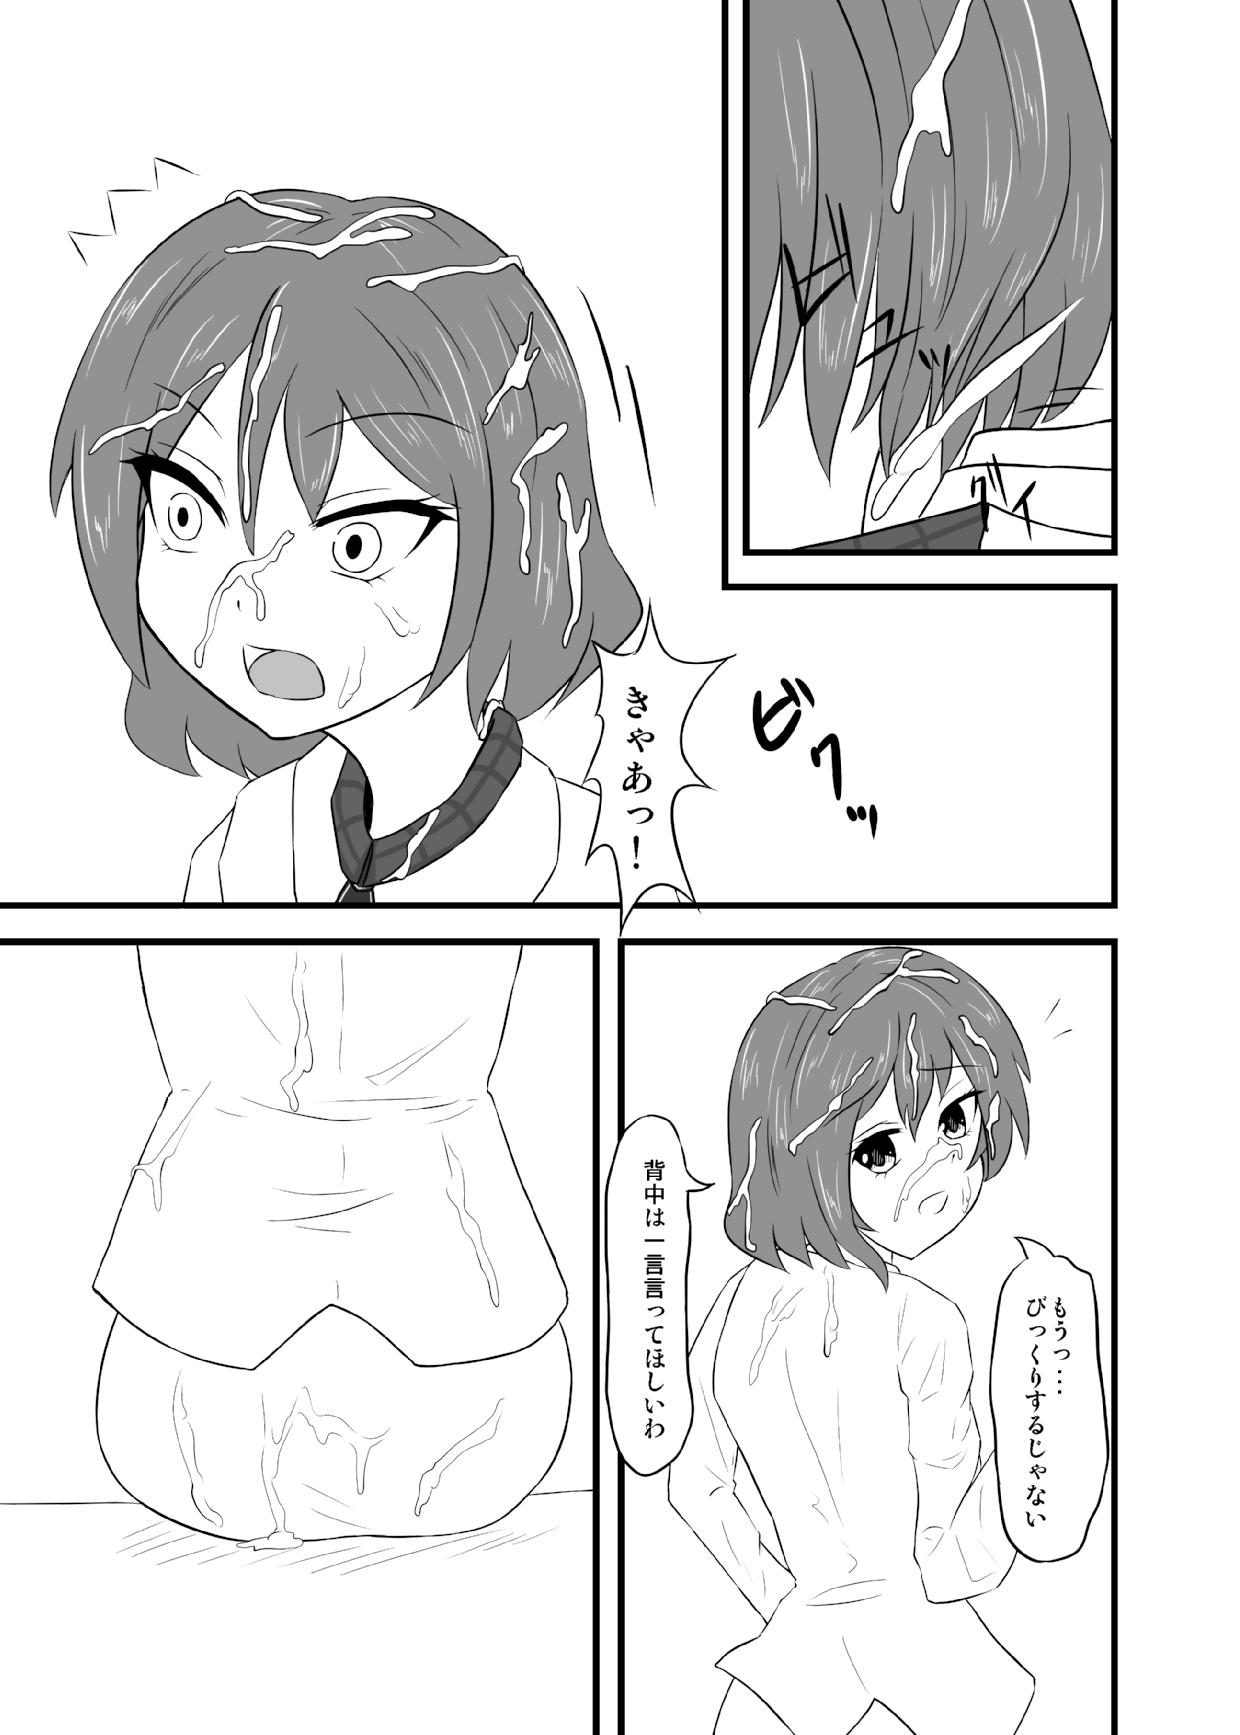 Coeds ぶっかけらいこ - Touhou project Topless - Page 10